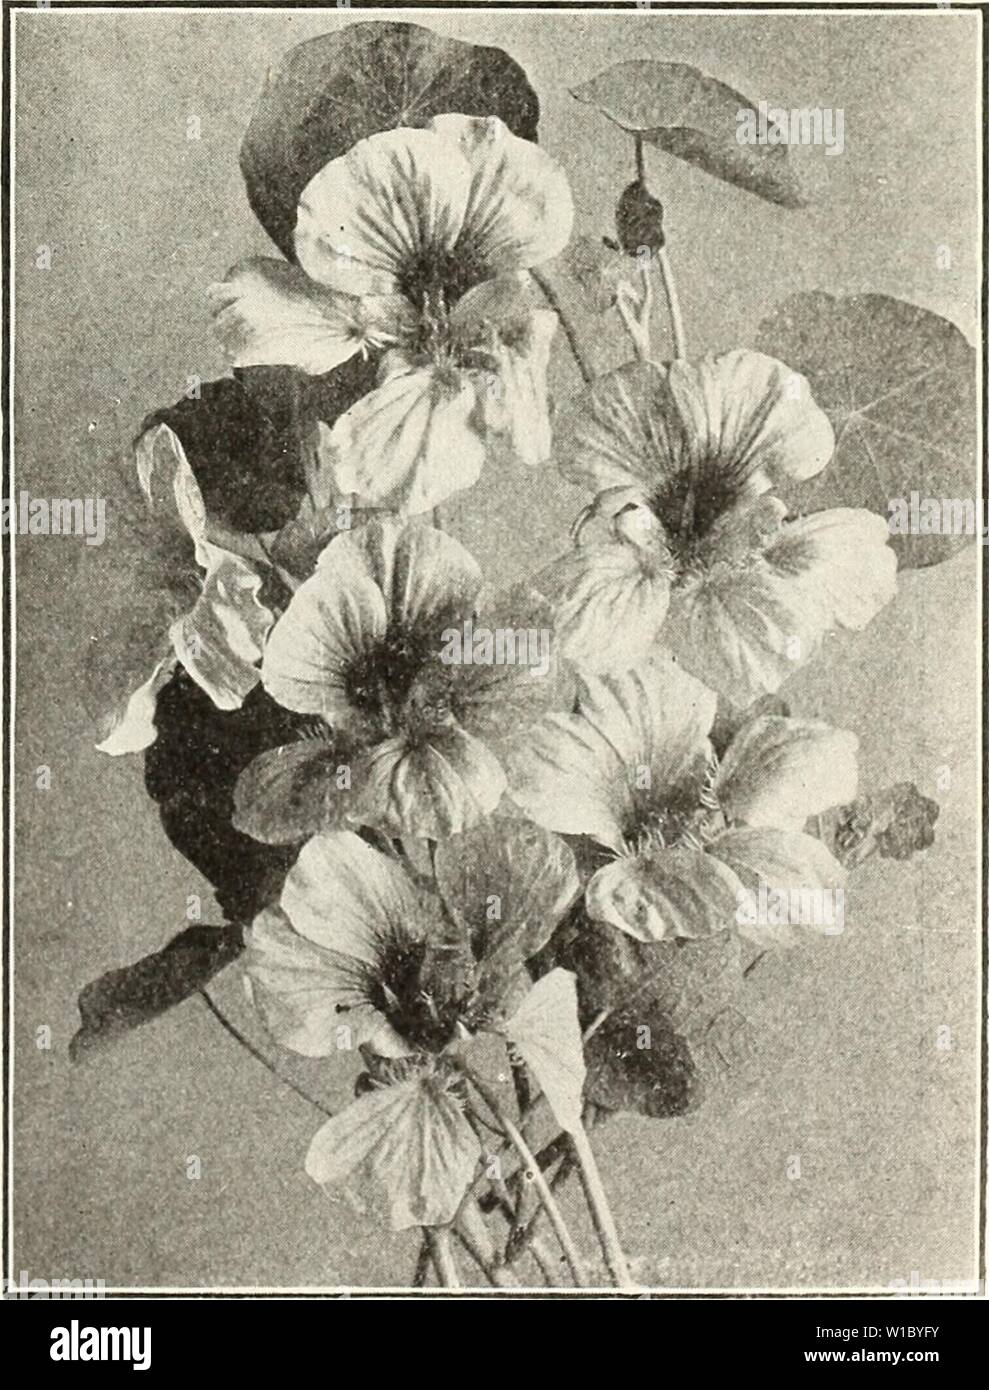 Archive image from page 48 of Descriptive catalogue of vegetable and. Descriptive catalogue of vegetable and flower seeds . descriptivecatal1926john Year: 1926  HORTICULTURAL AND AGRICULTURAL SUPPLIES 45 MALVA Handsome garden plants that bloom all Summer; fine for cut flowers. moschata alba (Musk Mallow). tH.P. White, fragrant. 2 ft. Pkt. lOc, M oz. 50c. rosea. fH.P. Rose-flowered variety; fine. Pkt. lOc, 3i oz. 50c. MATHIOLA bicornis. A charming little annual with a most deli- cate odor perceptible at a considerable distance. Pkt. lOc, H oz. 50c. MARTYNIA Curious and handsome, half-hardy annu Stock Photo